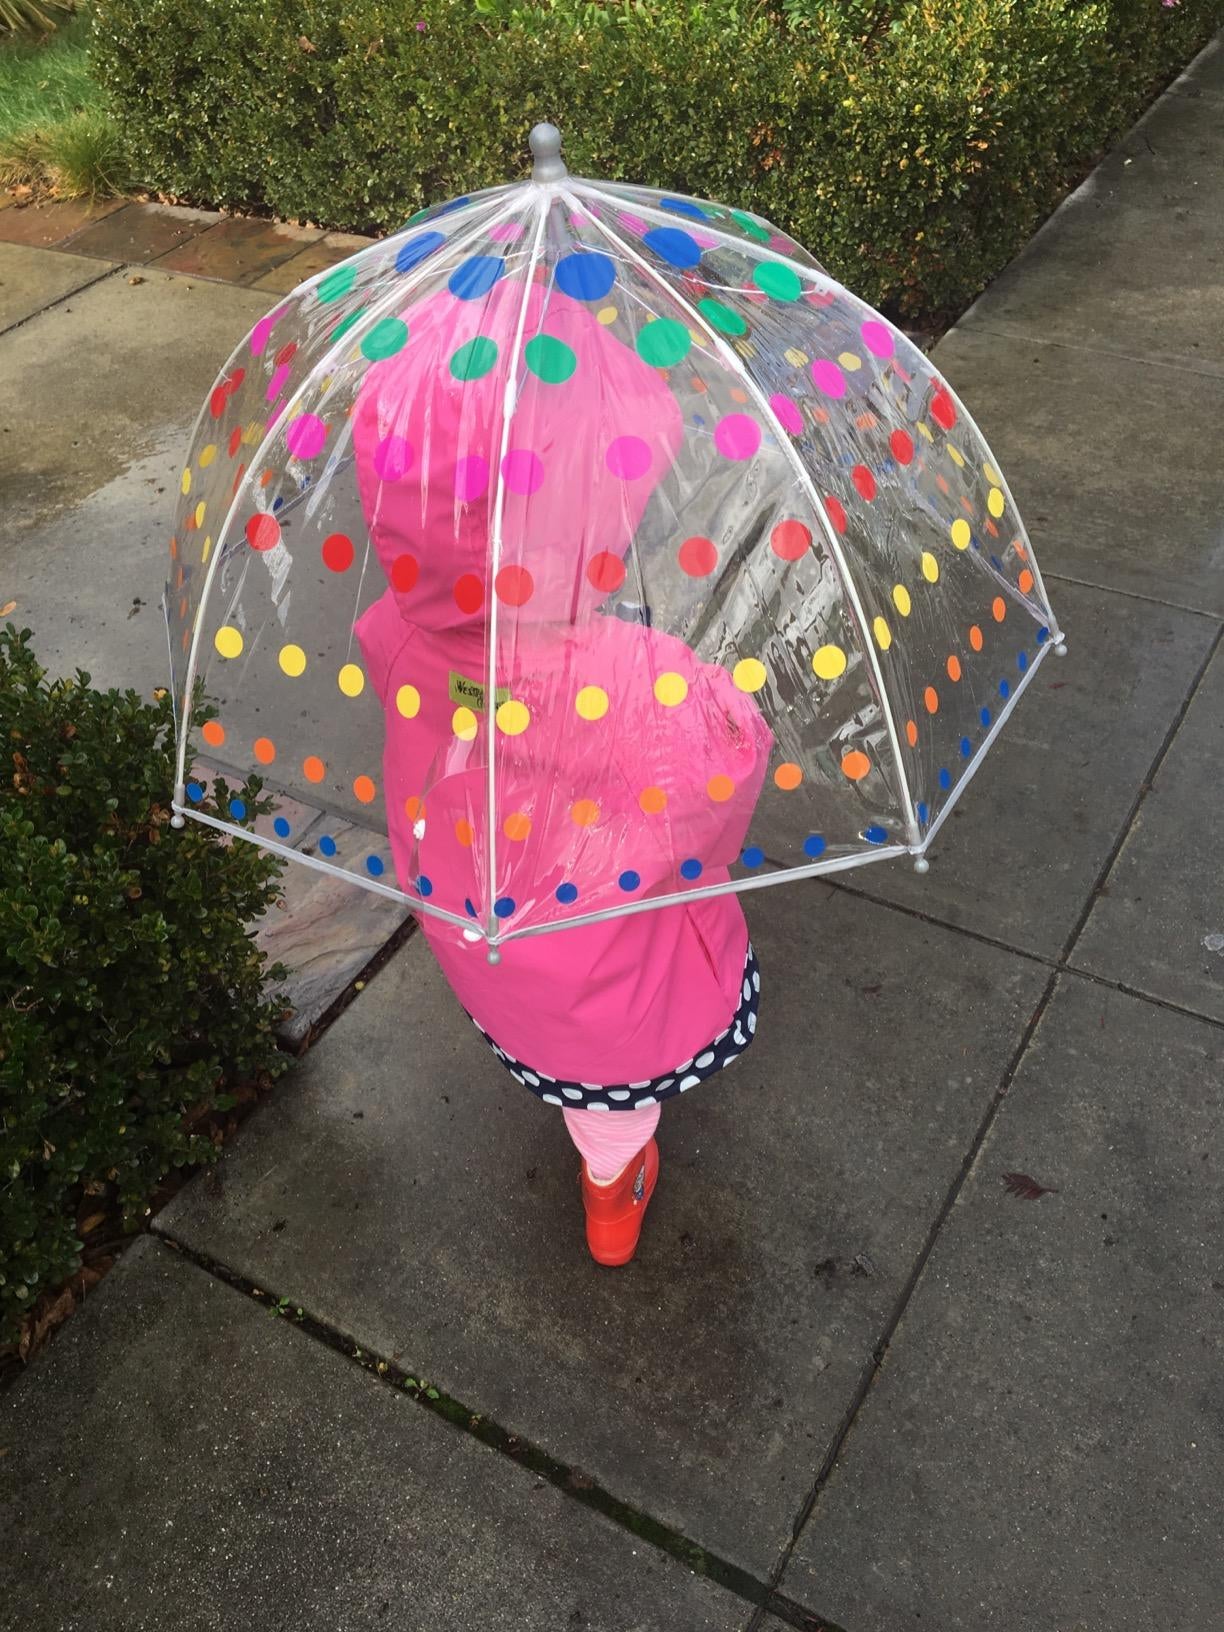 Reviewer's child walking in the rain holding the clear umbrella with colorful dots